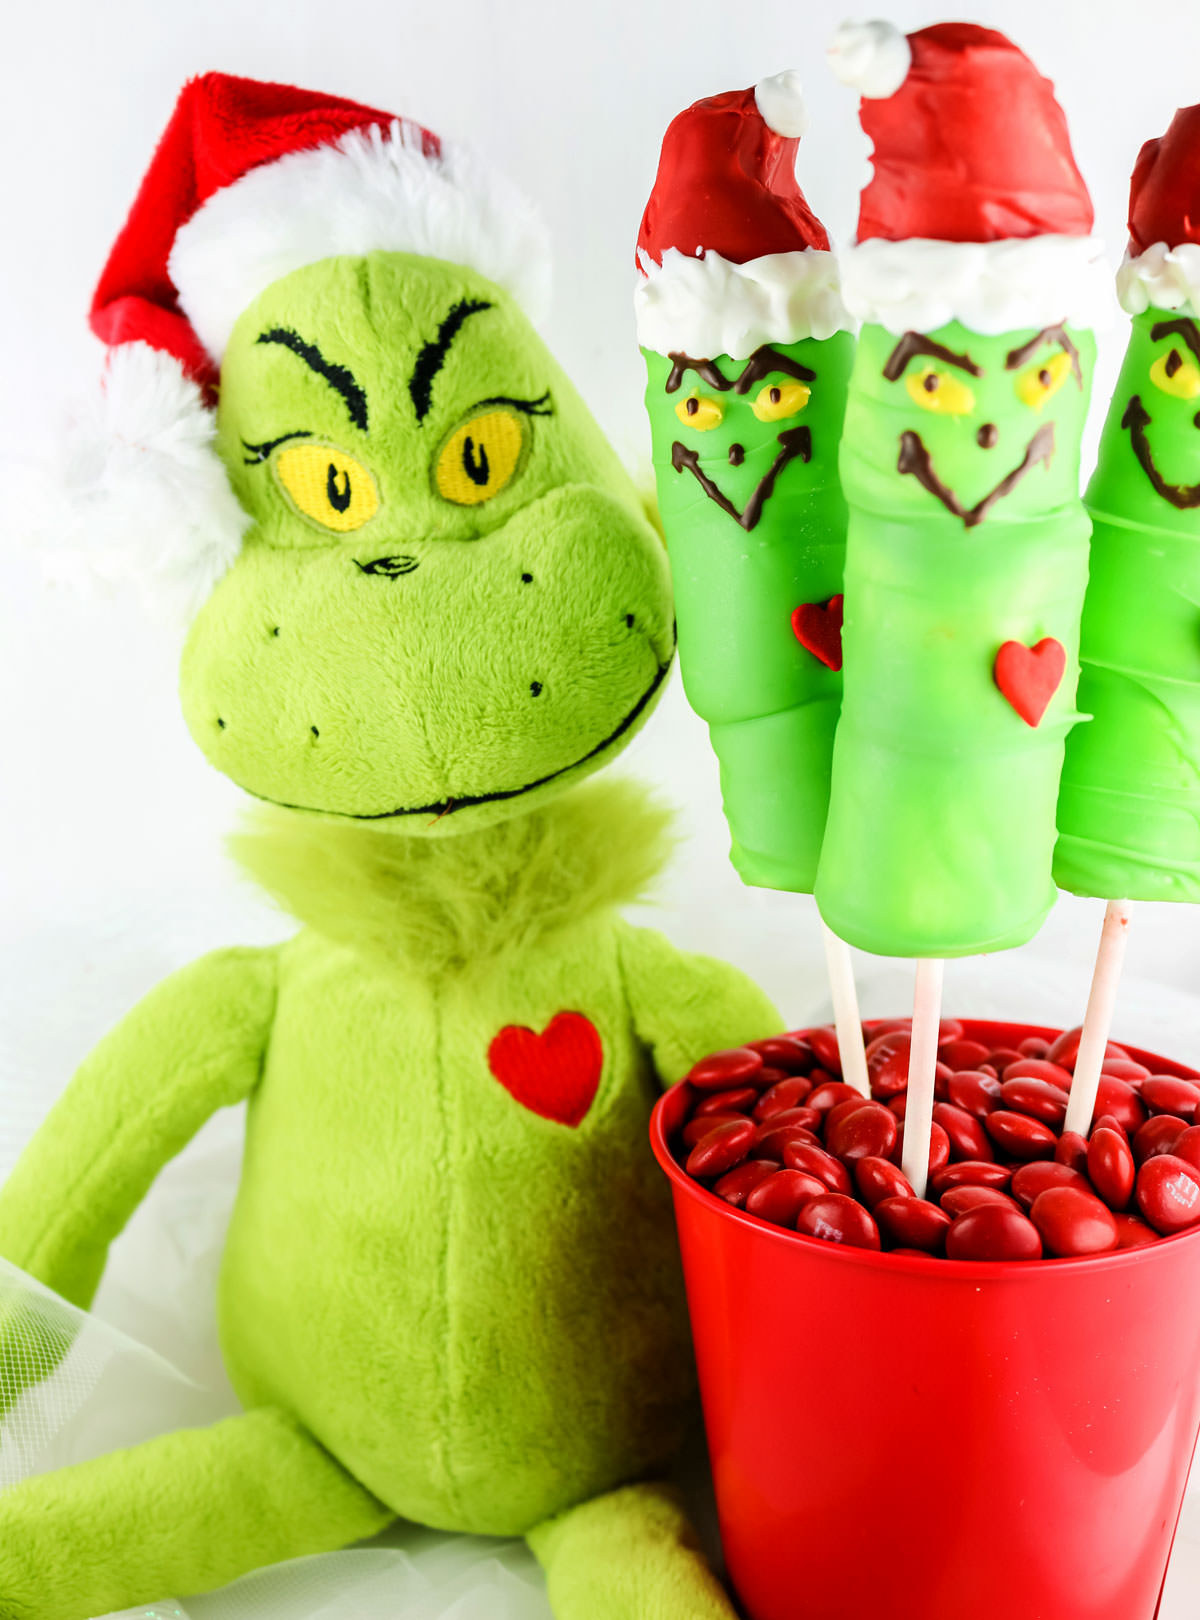 Closeup on a Grinch doll sitting next to a red pail holding three Grinch Marshmallow Pops.